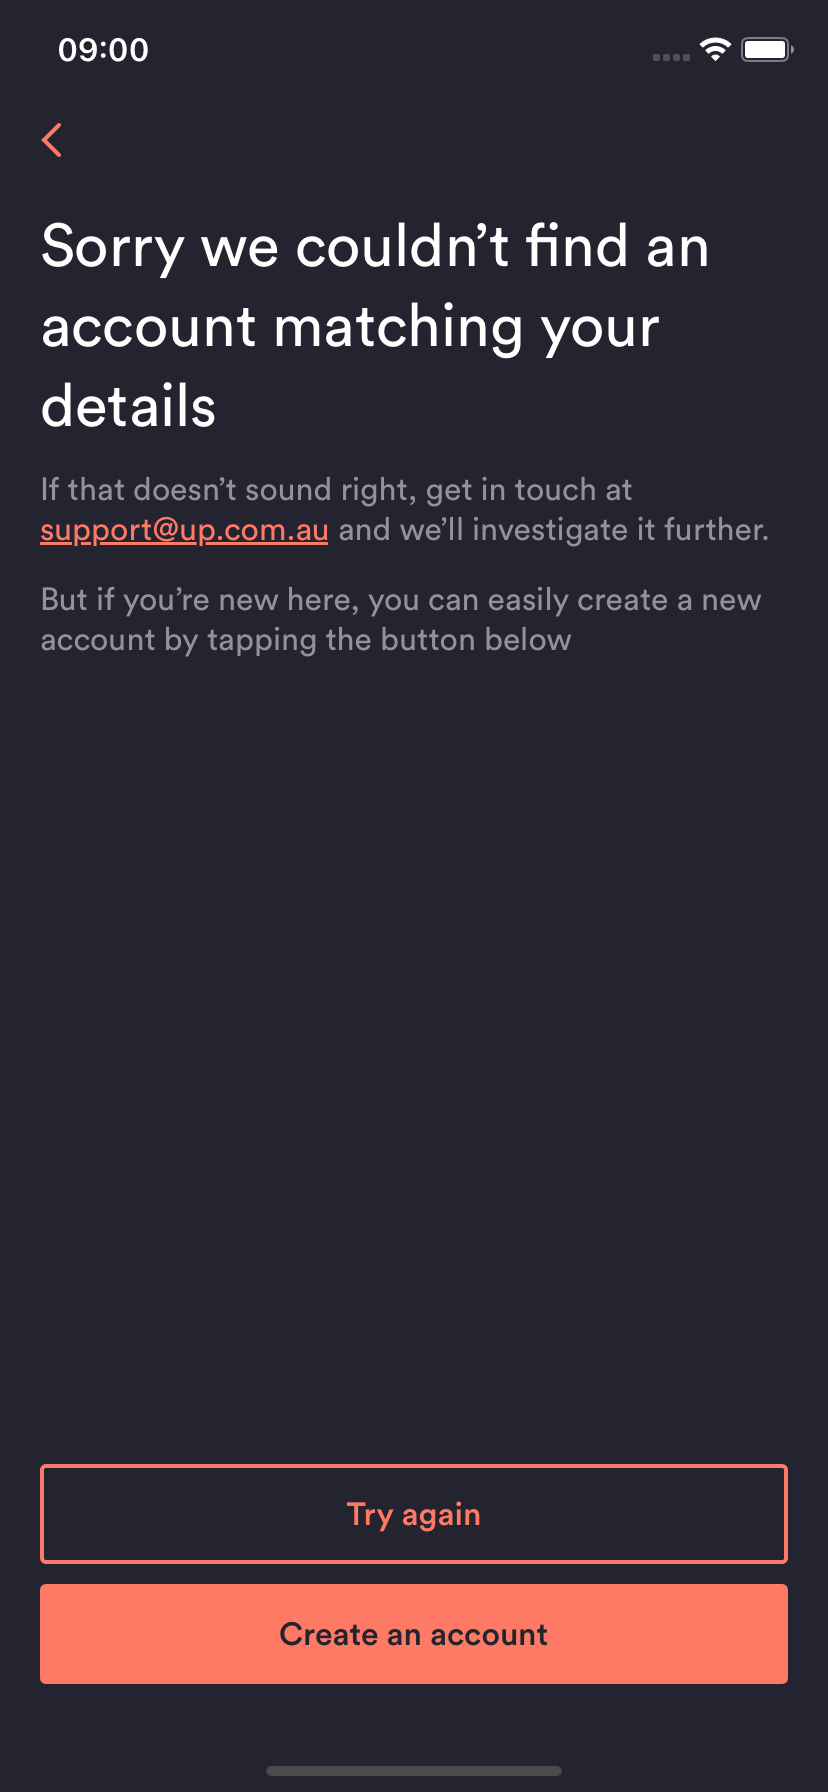 Screen showing error page when there is no account matching the details you've entered